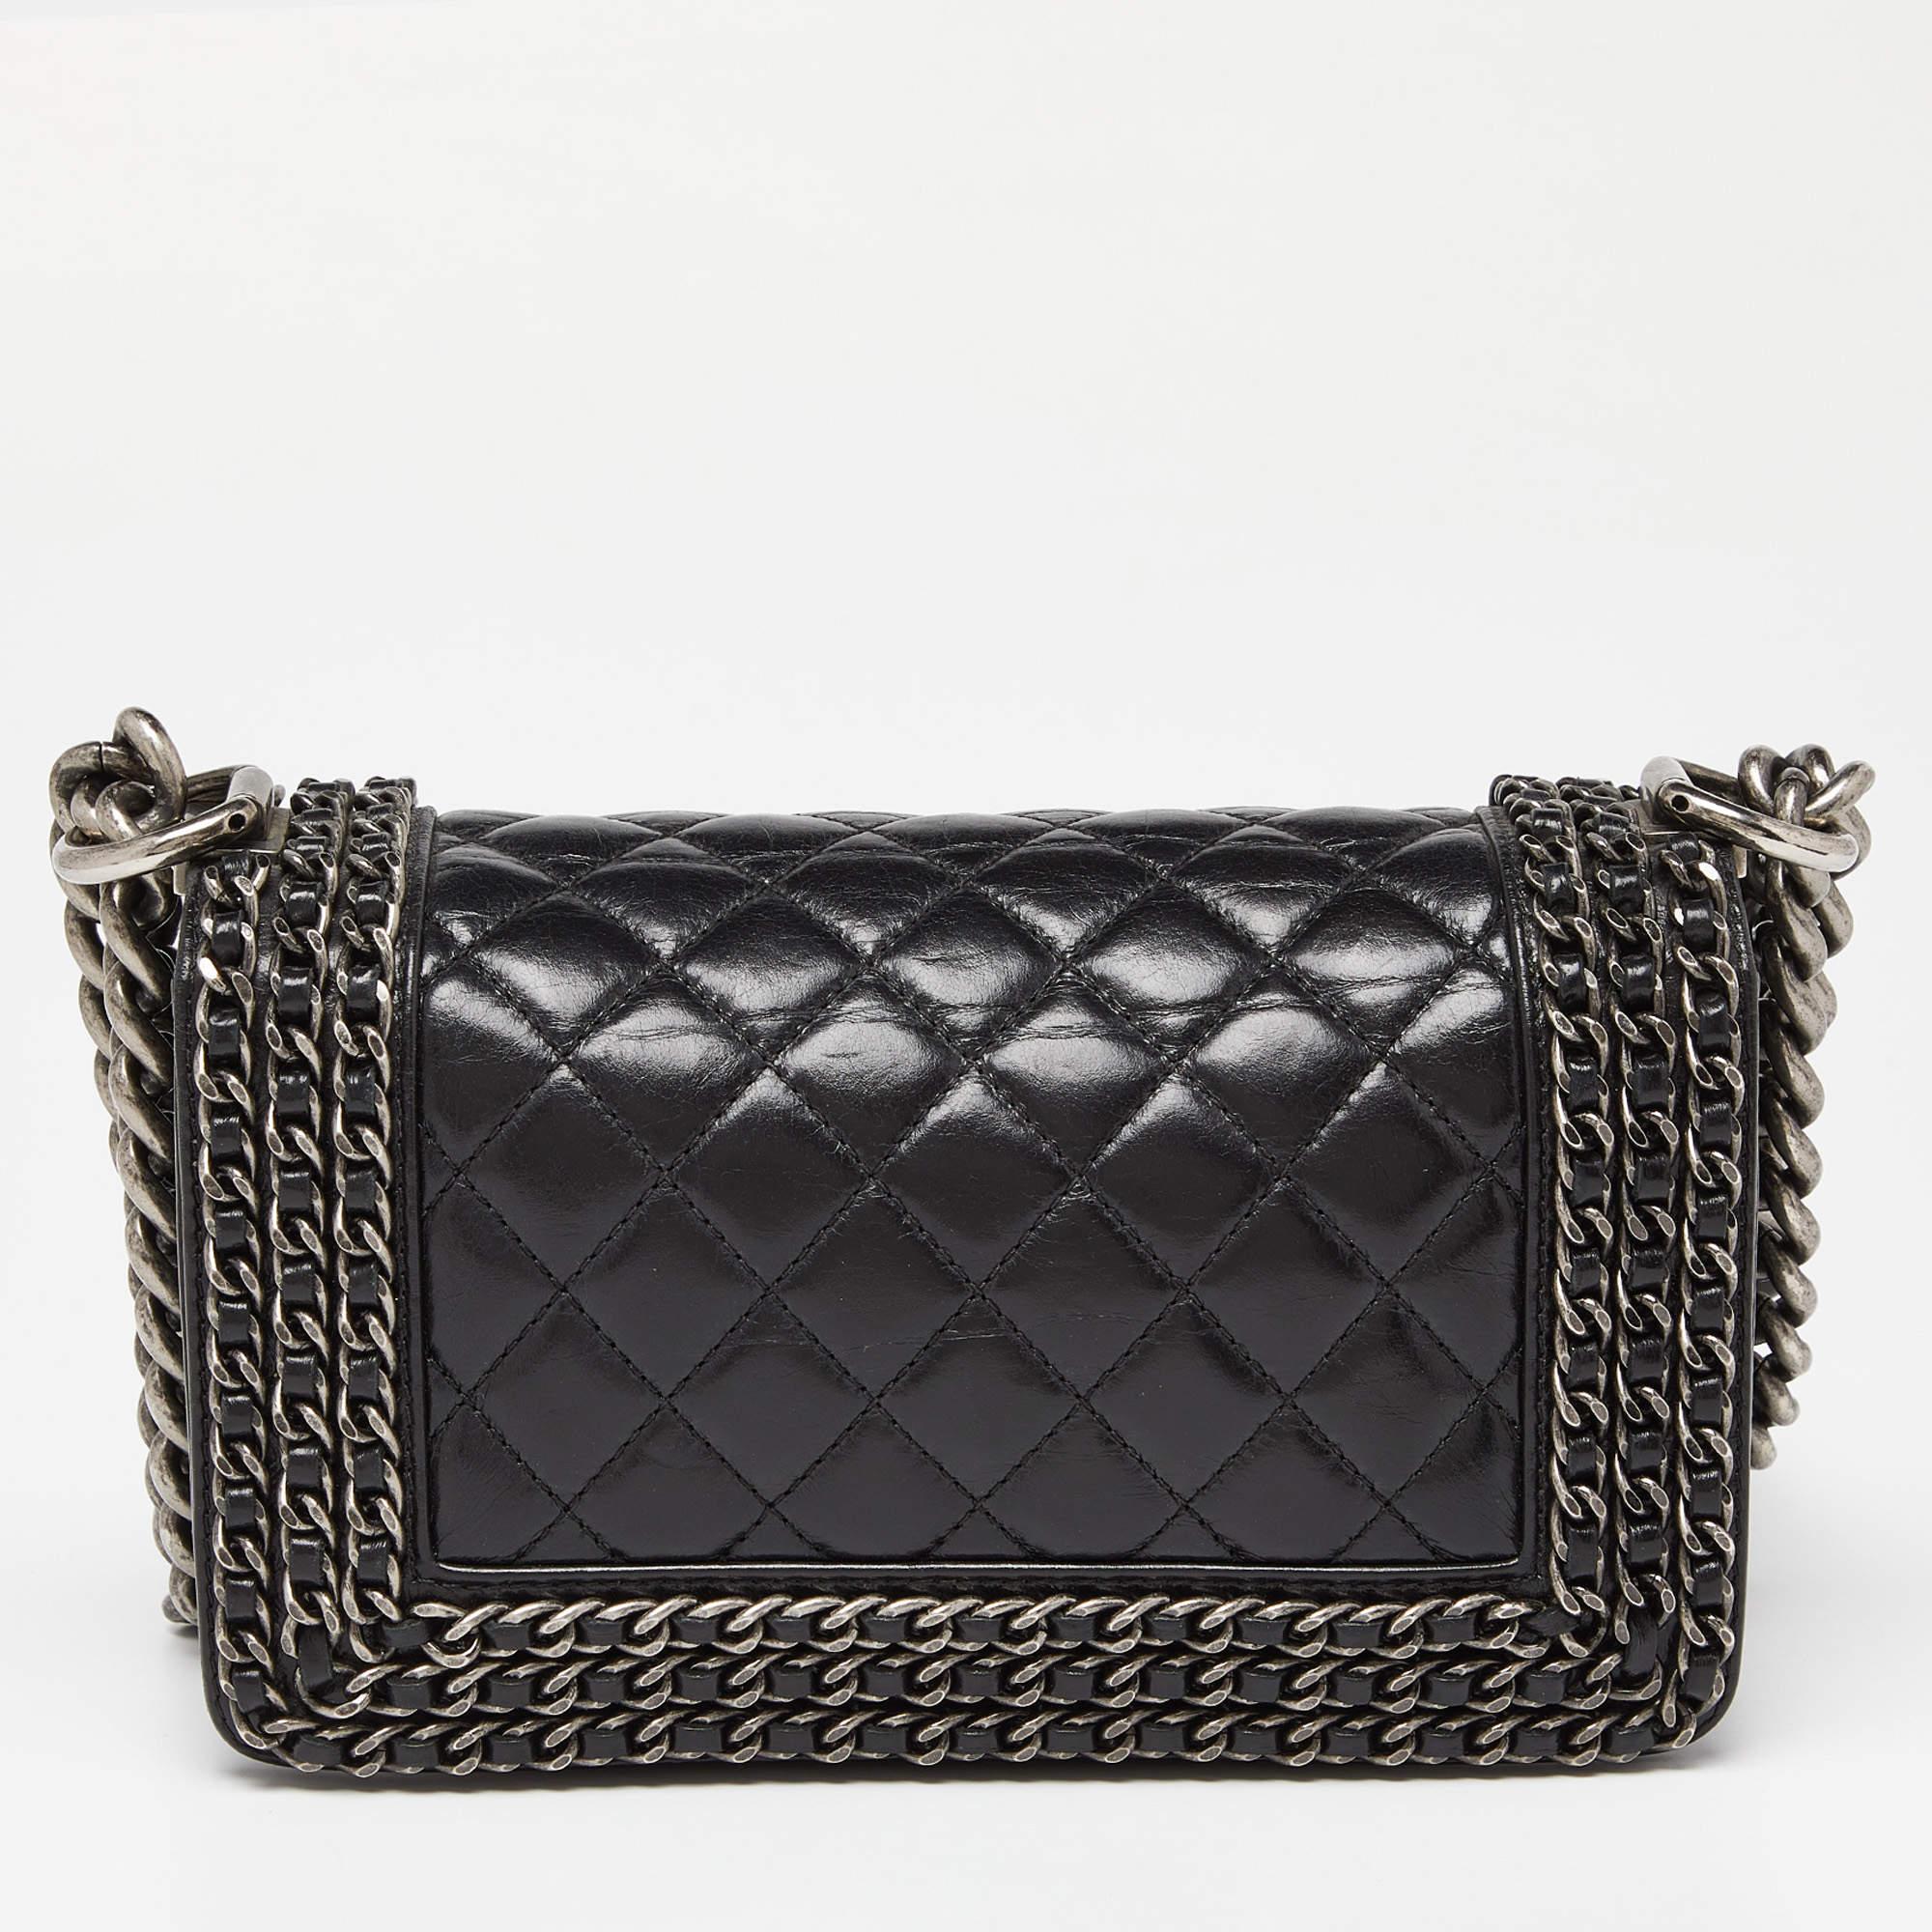 A classic handbag comes with the promise of enduring appeal, boosting your style time and again. This Chanel small Boy flap bag is one such creation. It’s a fine purchase.

